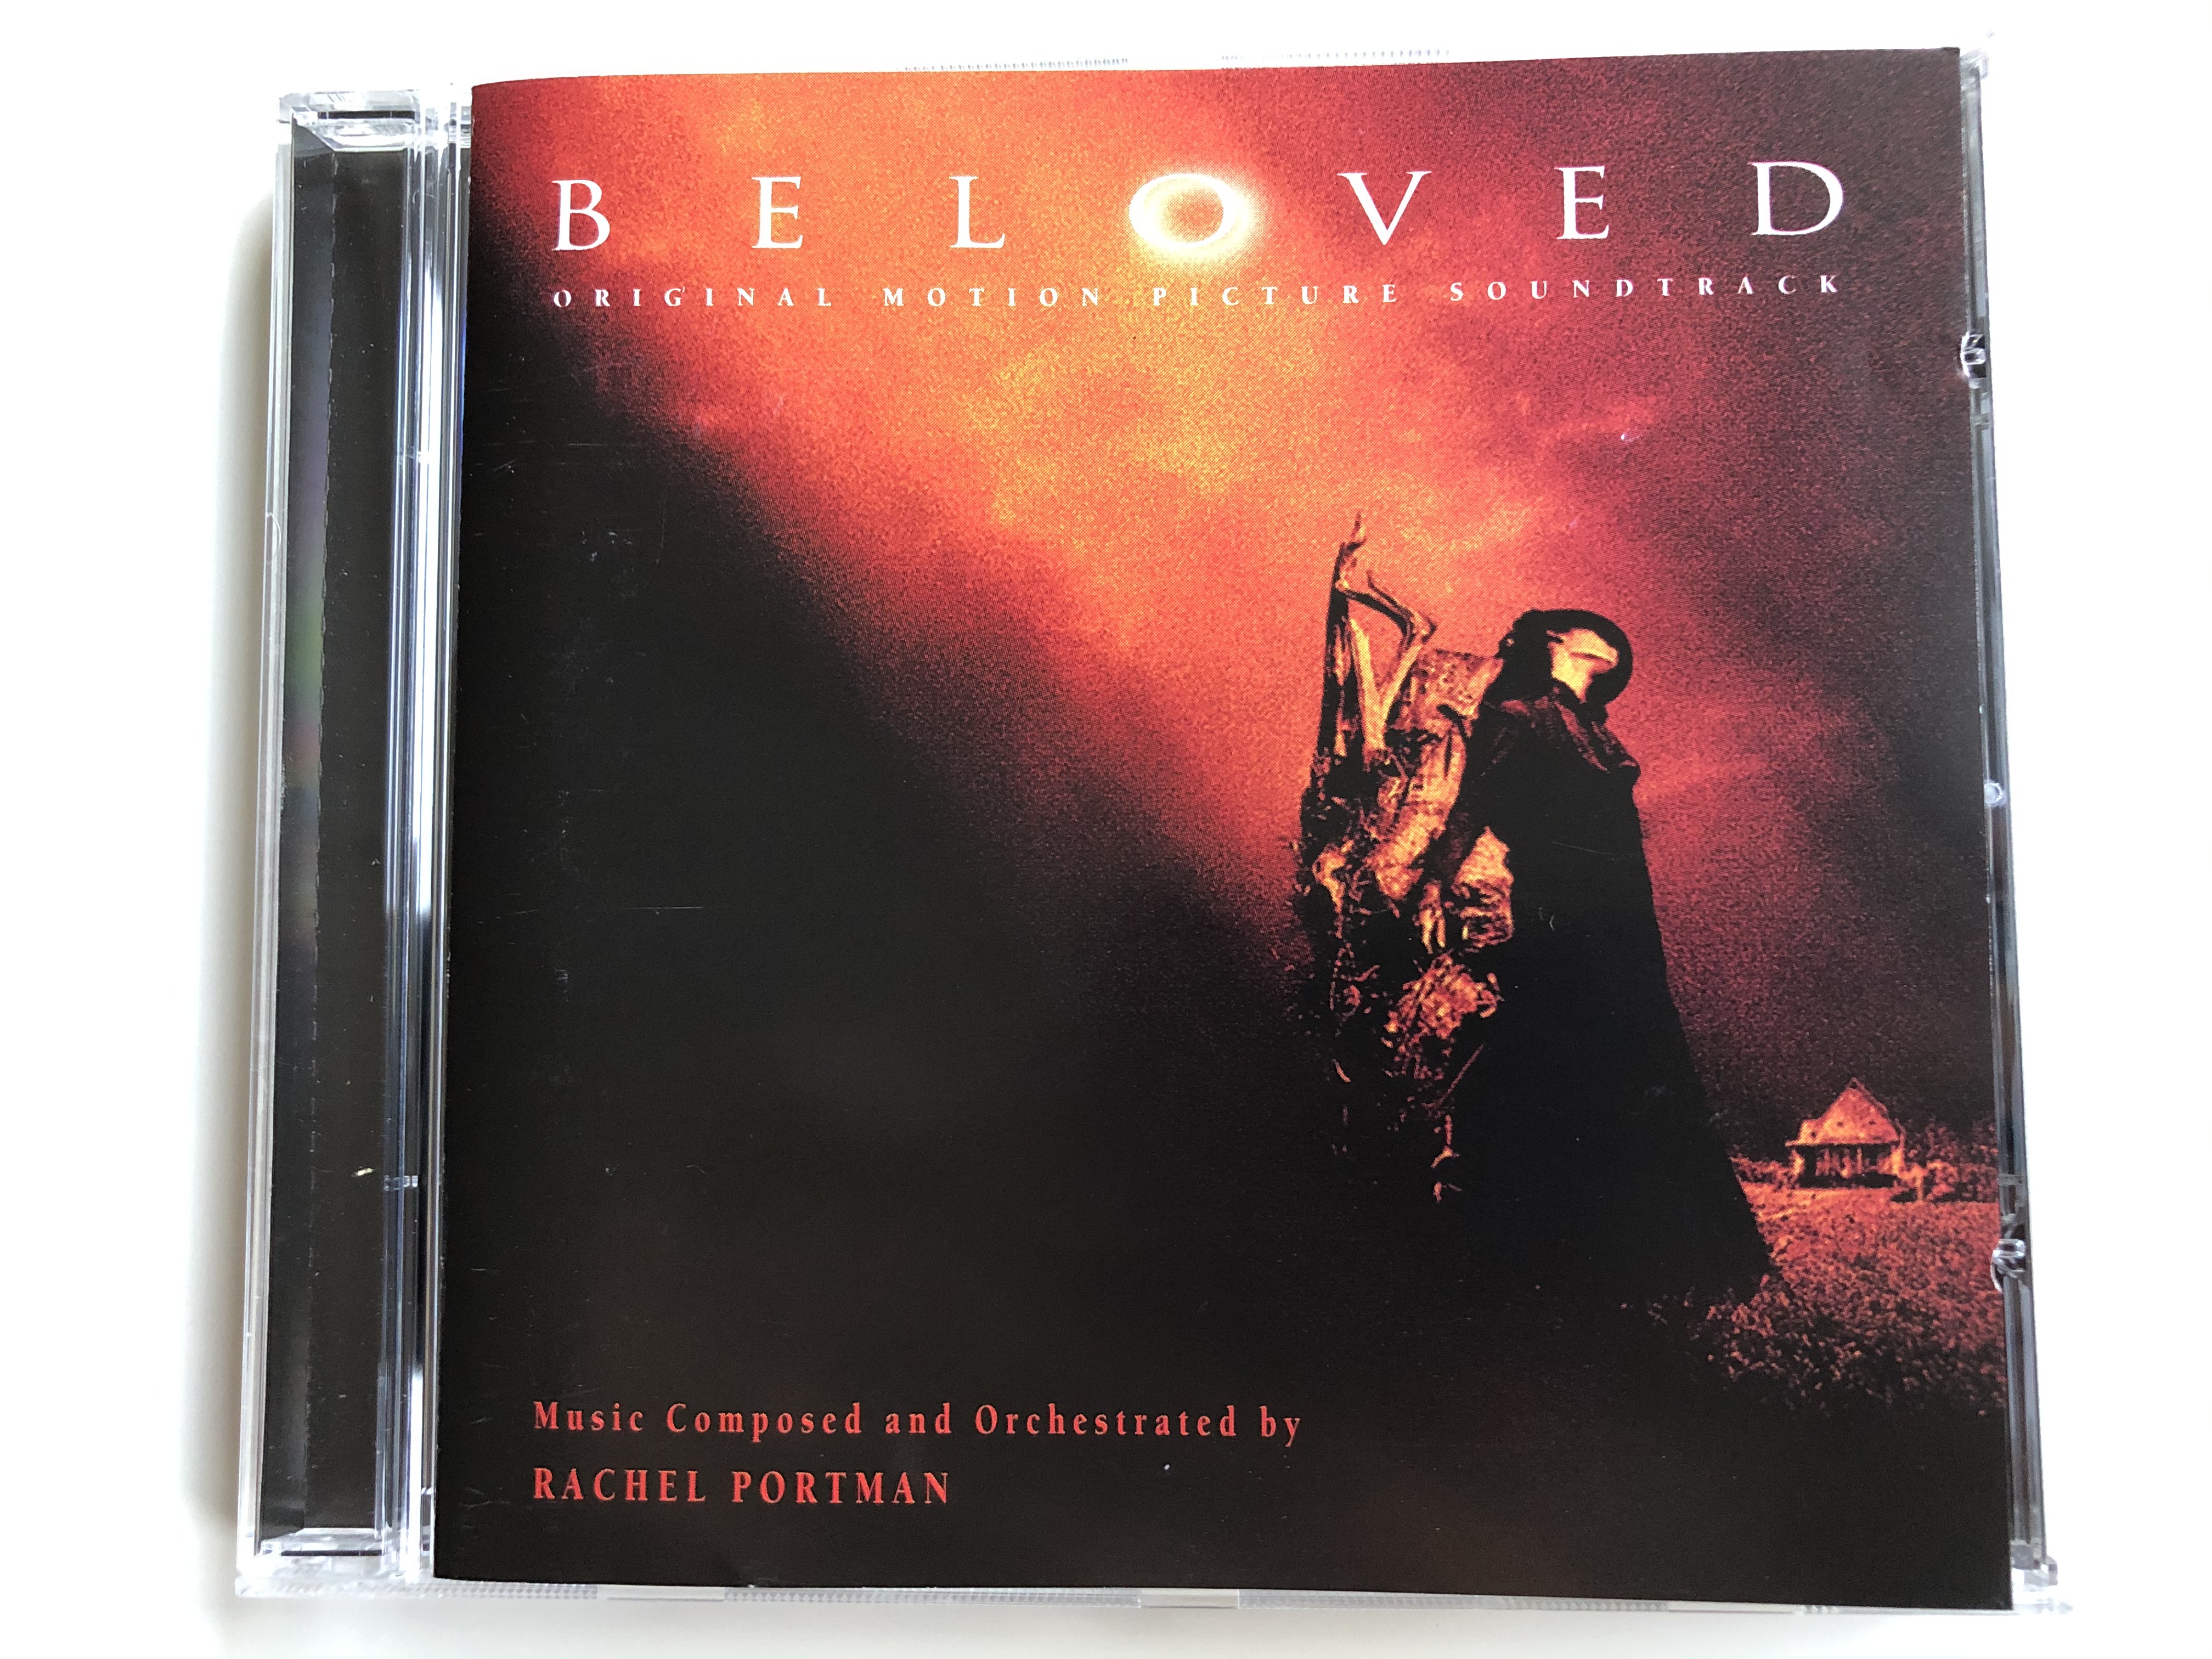 beloved-original-motion-picture-soundtrack-music-composed-and-orchestrated-by-rachel-portman-epic-audio-cd-1999-492679-2-1-.jpg